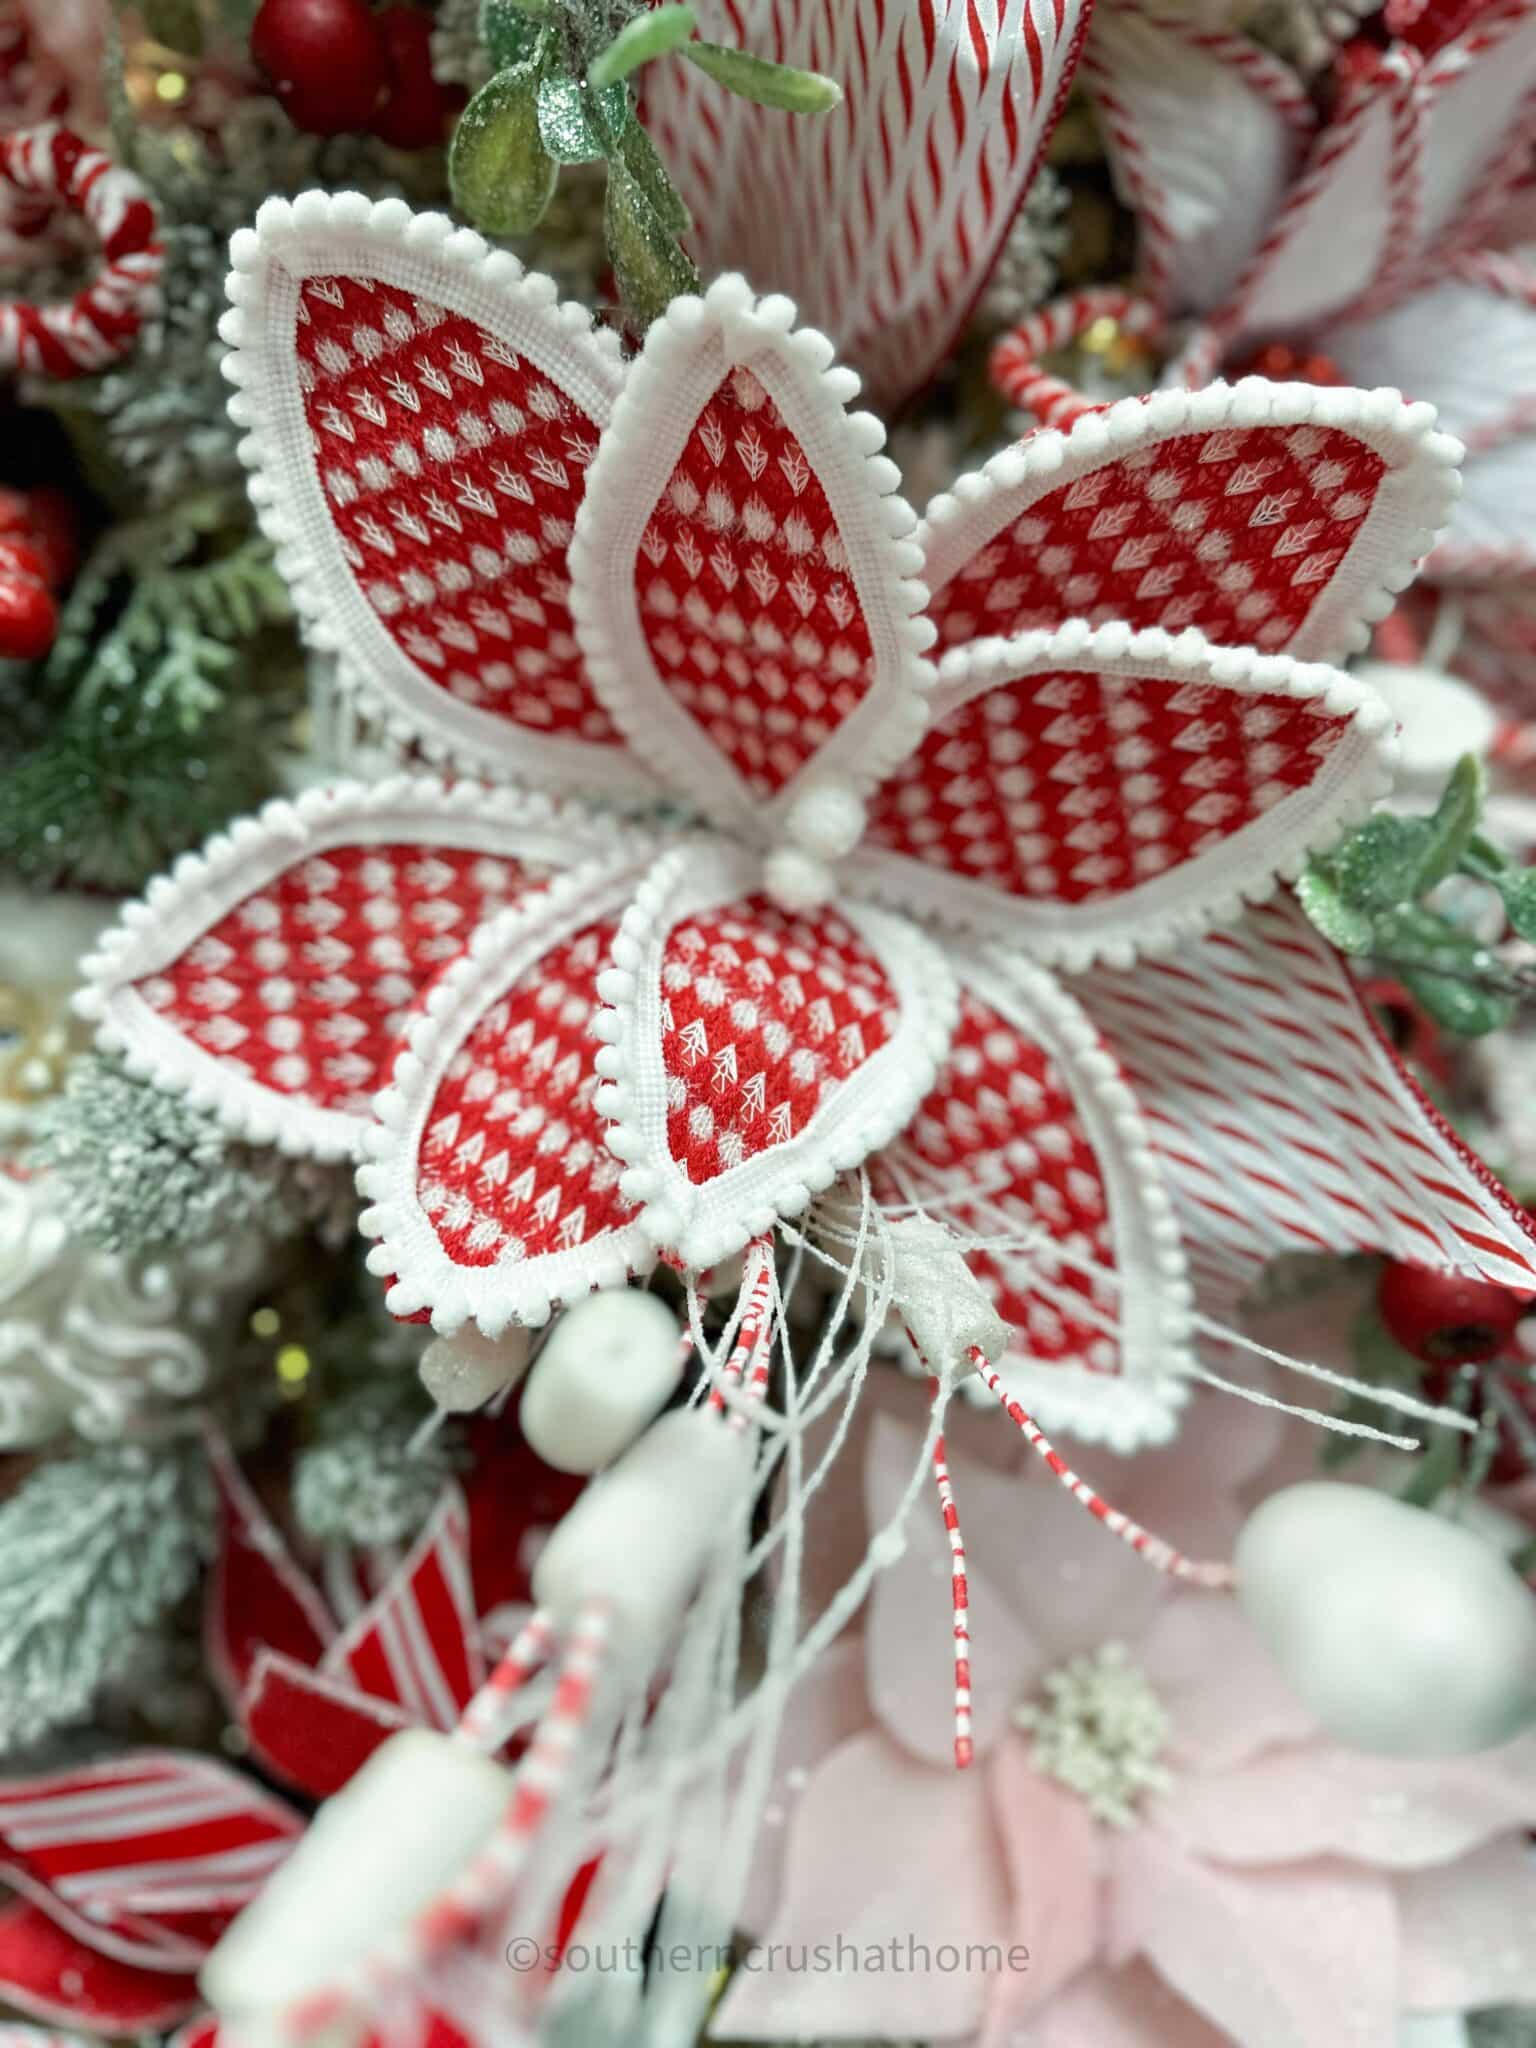 up close gingham check poinsettia